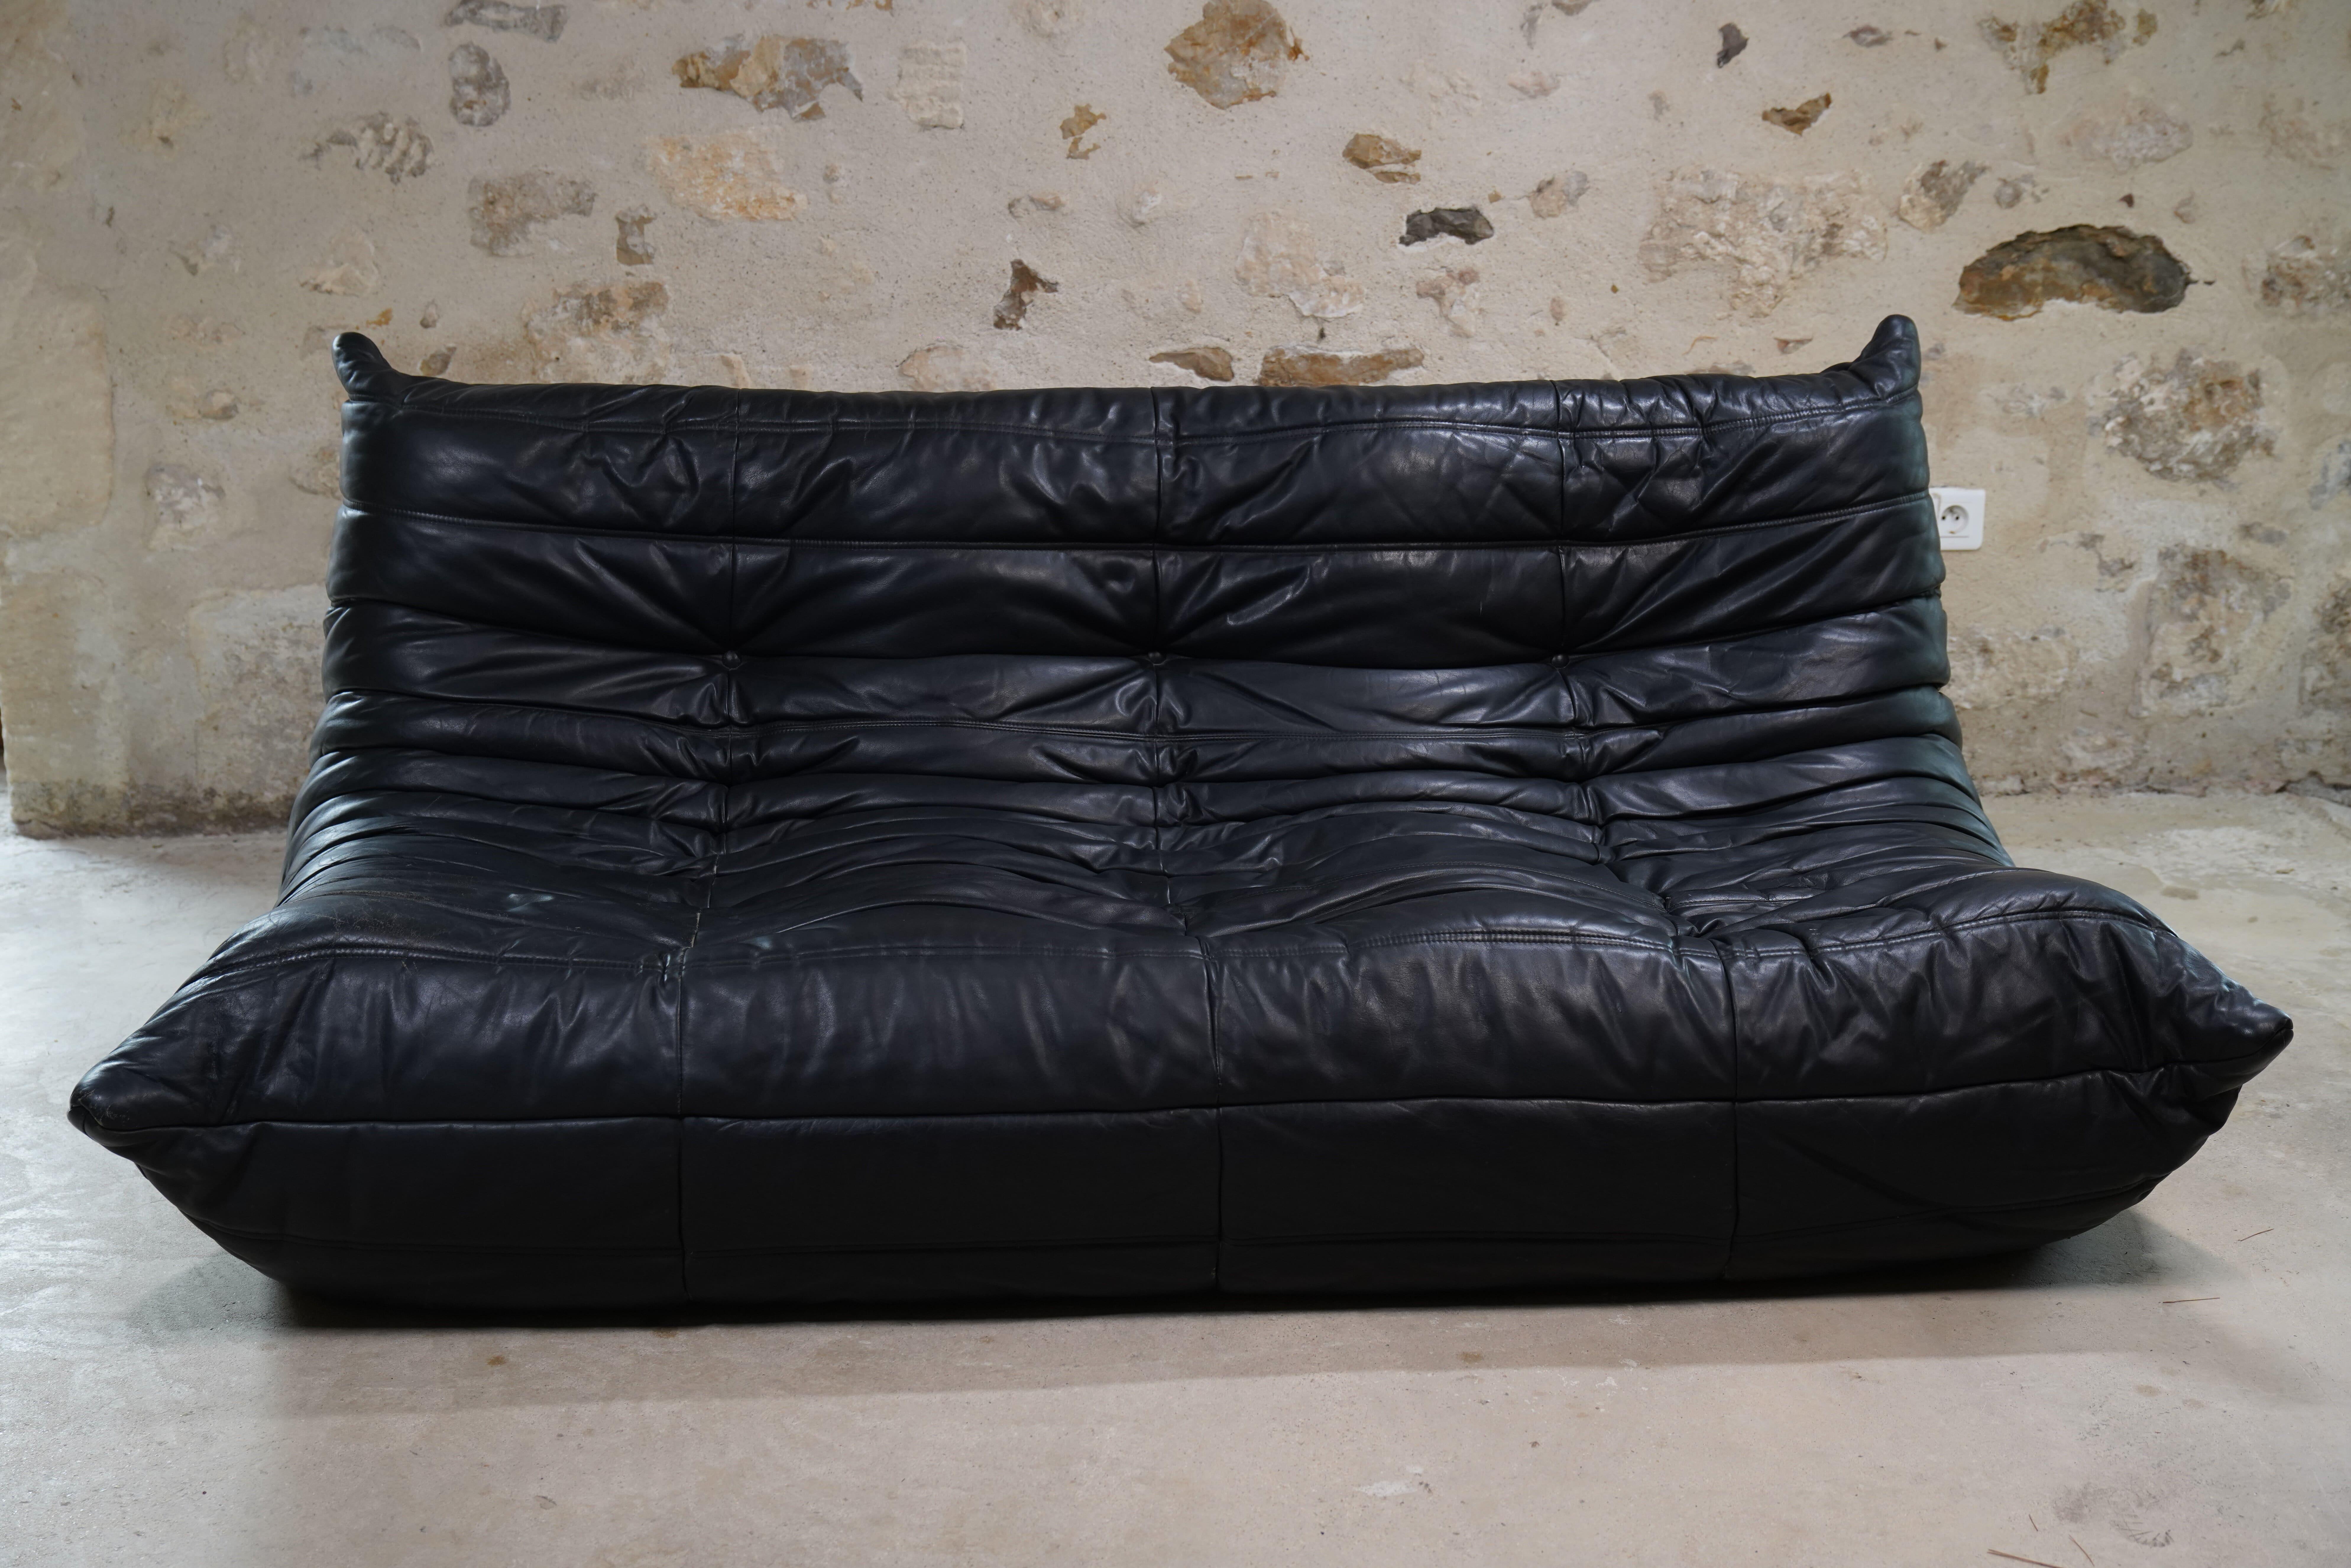 Gorgeous 3-seater Togo sofa in black leather designed by Michel Ducaroy for Ligne Roset from 1998.

Designer Michel Ducaroy drew inspiration for the Togo's design from an aluminum toothpaste tube noticing it “folded back on itself like a stovepipe